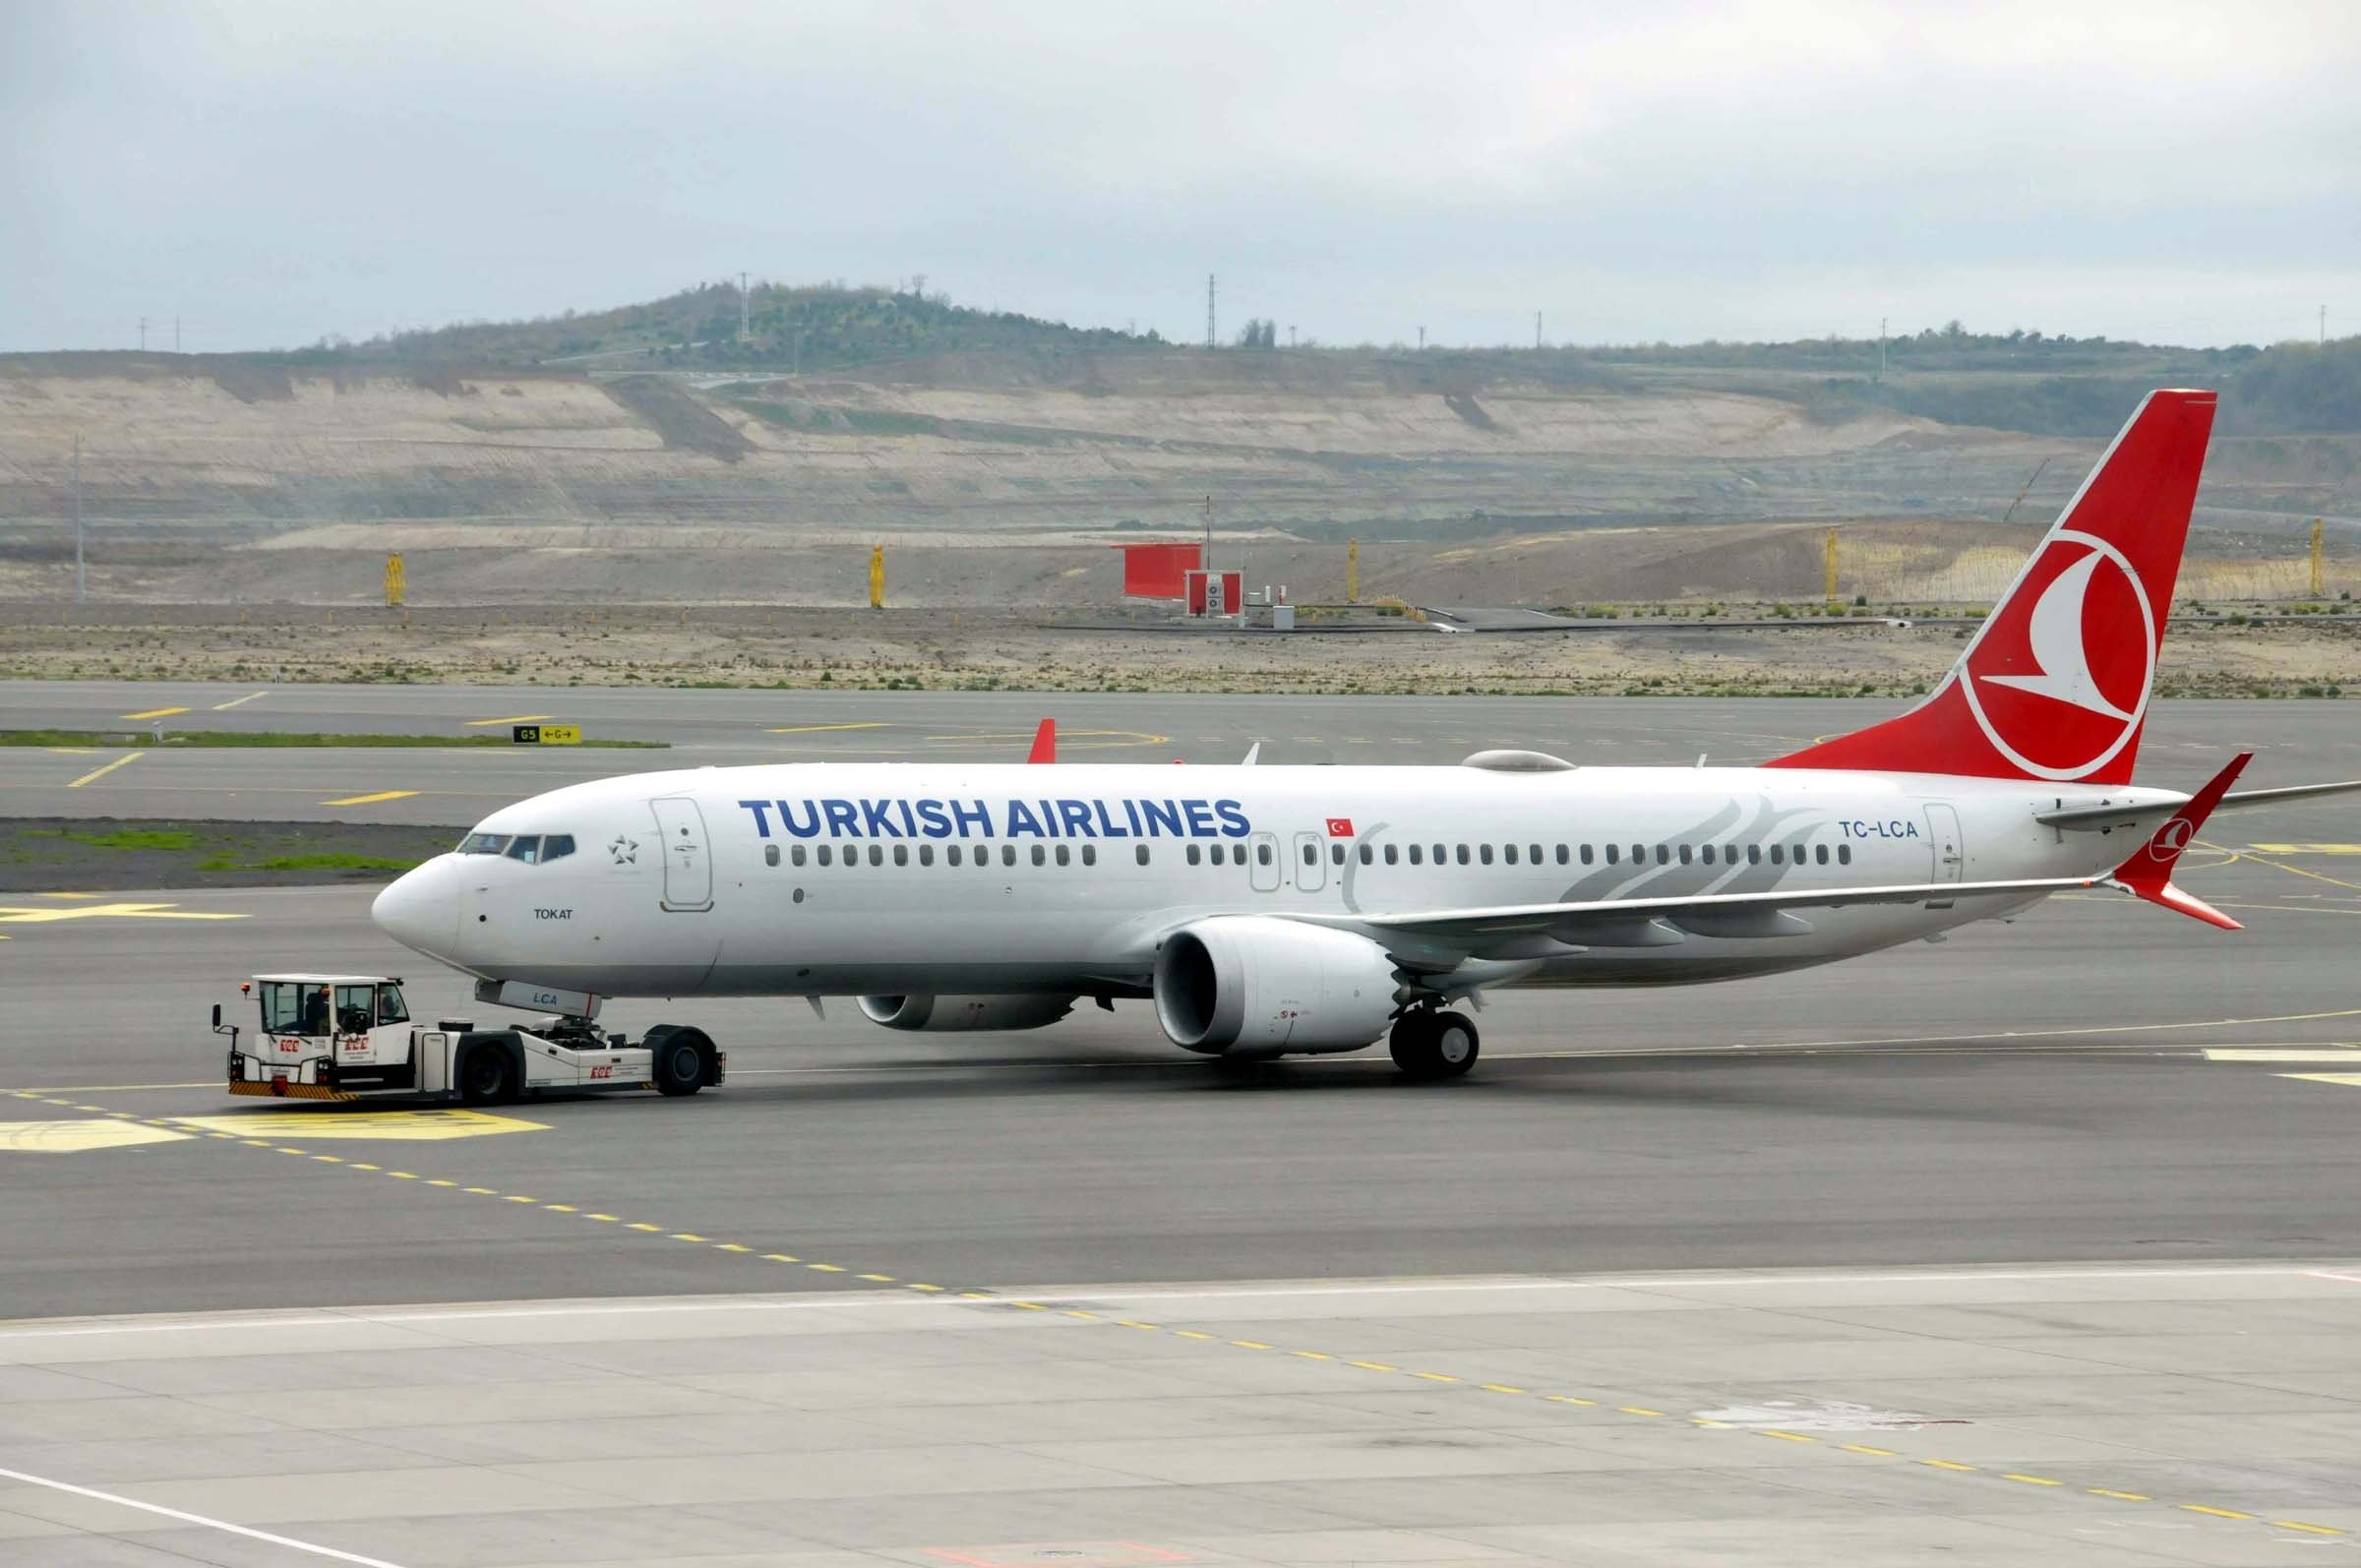 Turkish Airlines' Boeing 737 Max returns to sky after 2 years | Daily Sabah